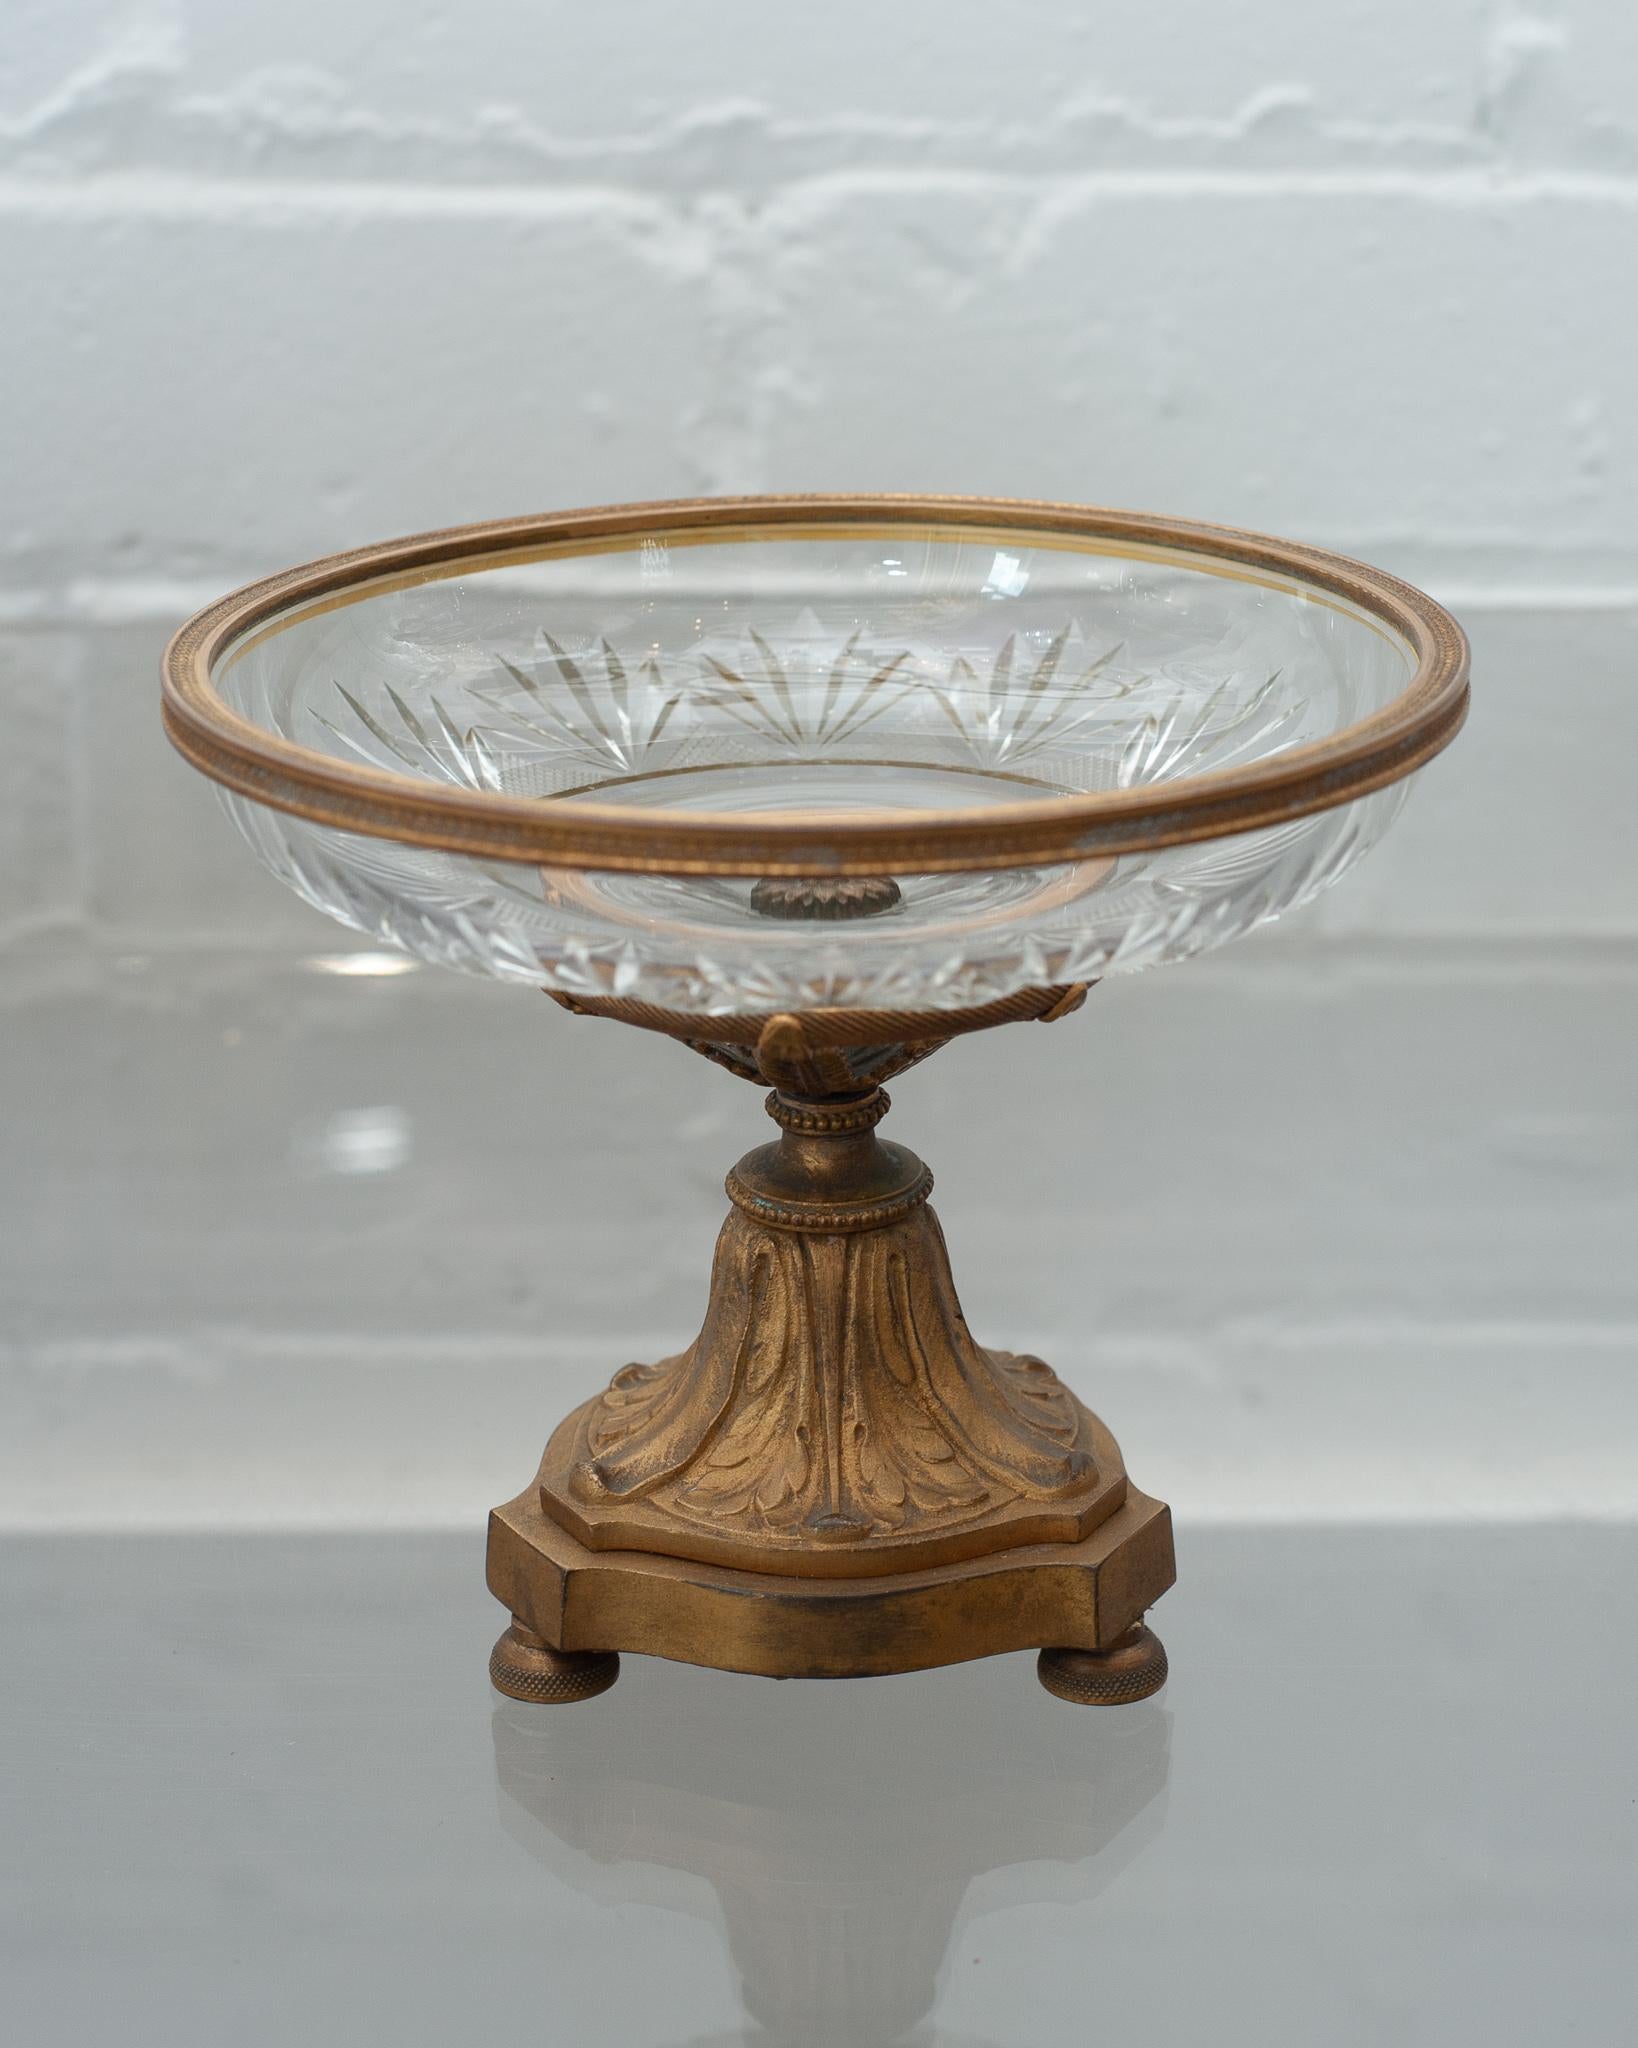 A stunning and beautifully made antique French cut crystal and bronze tazza, made circa 1890. Bronze trims are in excellent condition for their age and the elaborate hand cut crystal catches the light.